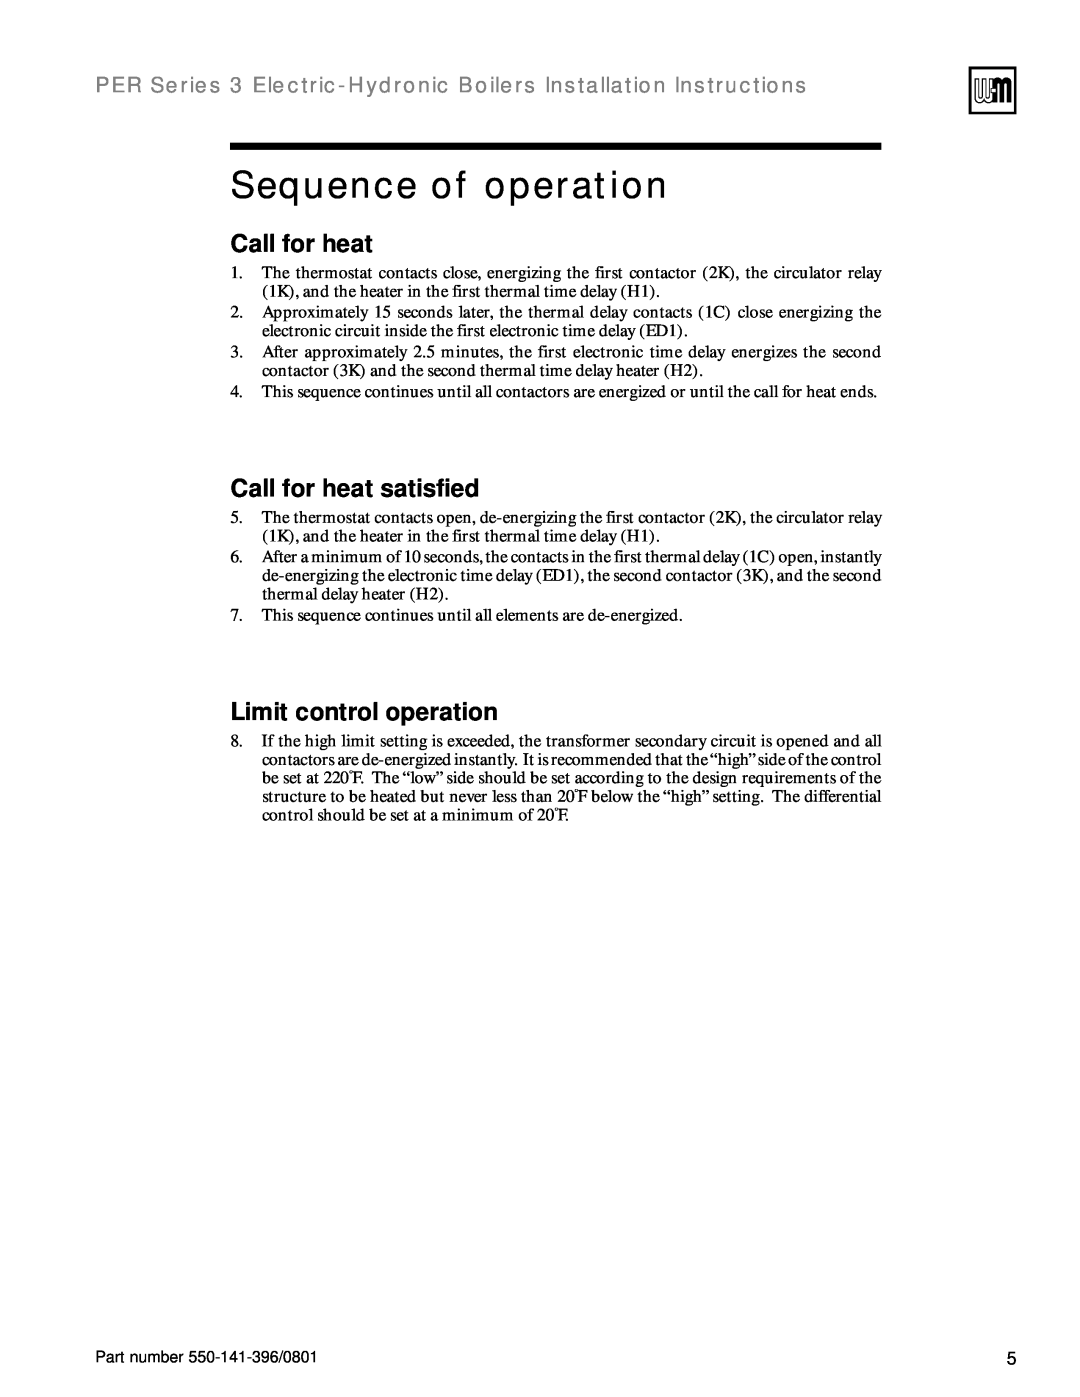 Weil-McLain 550-141-396/0801 Sequence of operation, Call for heat satisfied, Limit control operation 